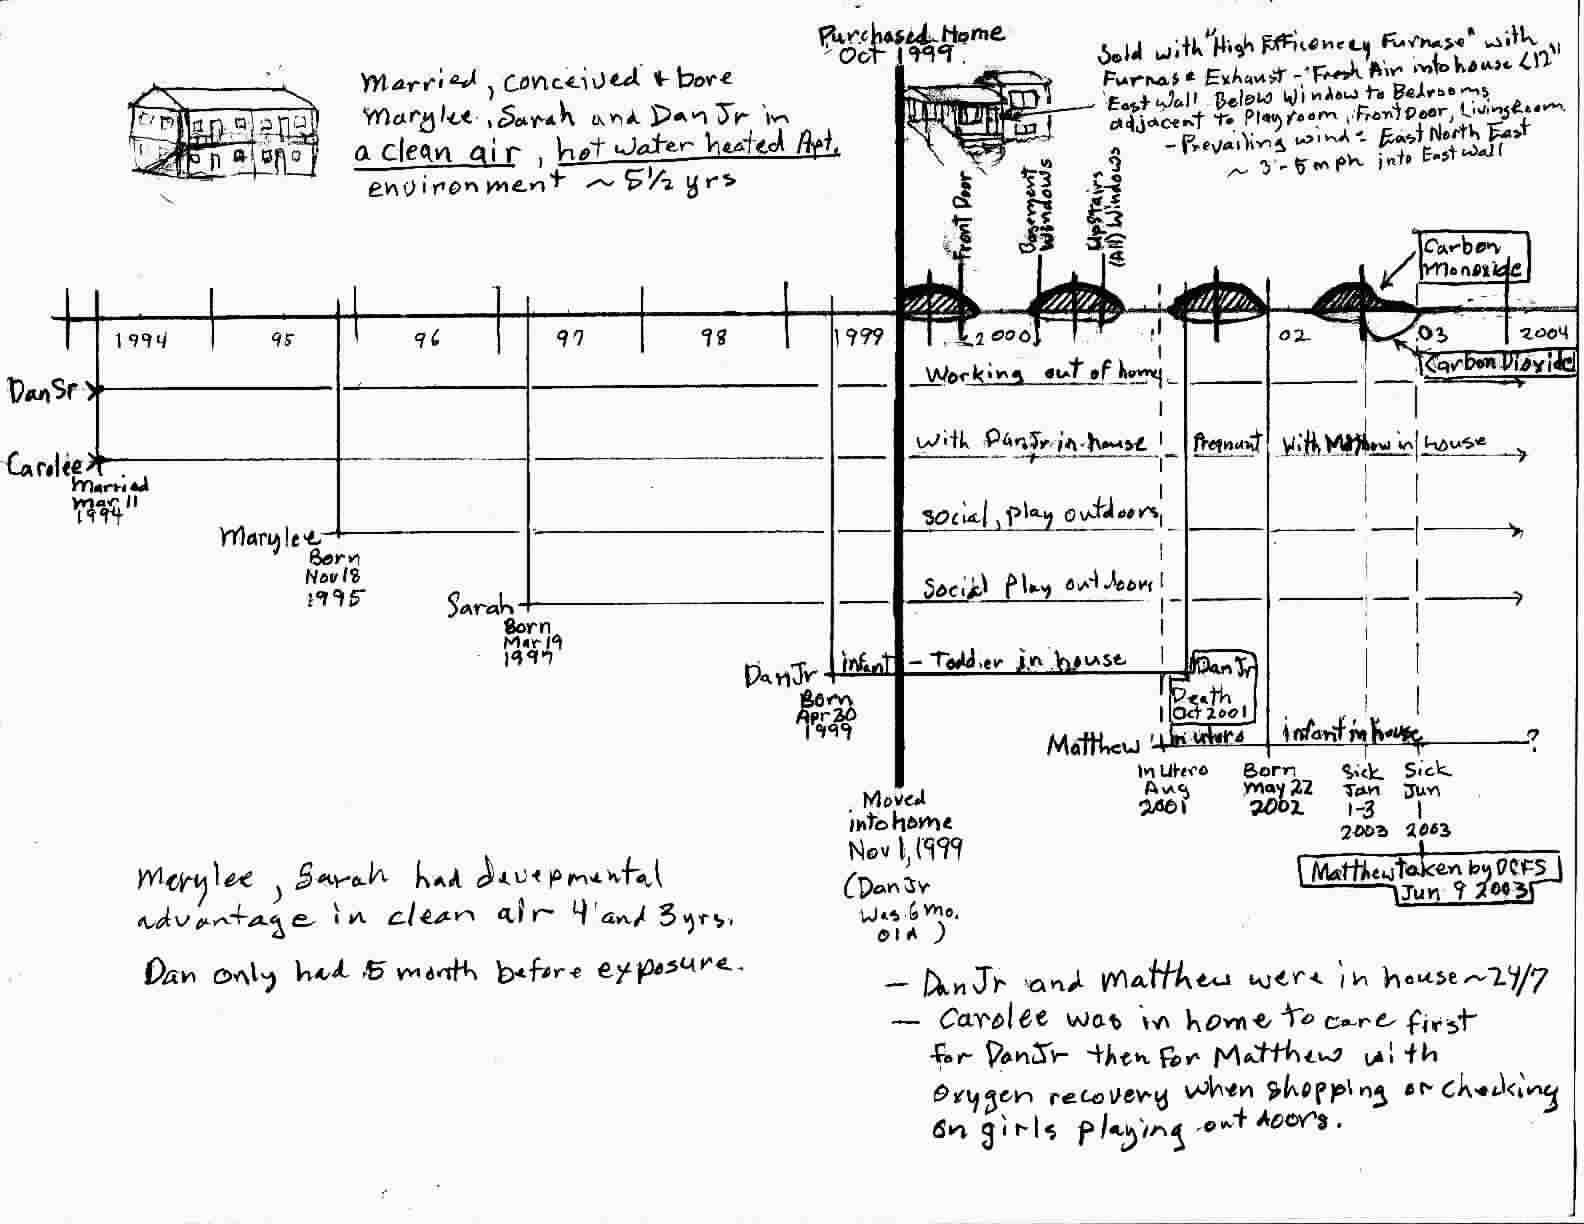 Time line chart - TLR 1/28/04